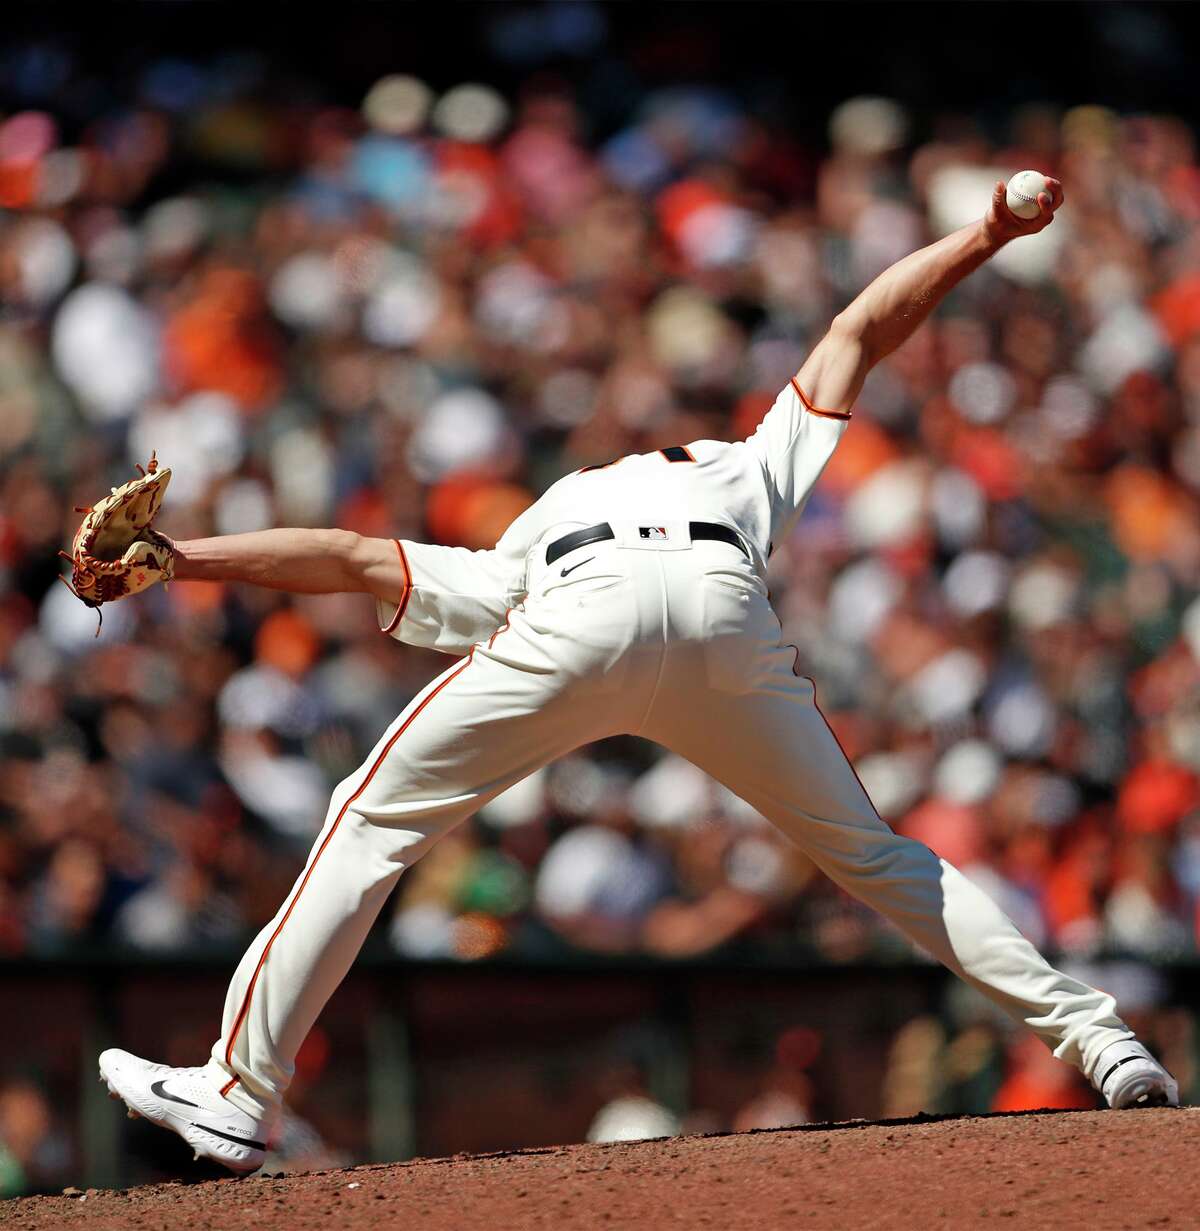 San Francisco Giants' Tyler Rogers pitches against Houston Astros in 8th inning during MLB game at Oracle Park in San Francisco, Calif., on Sunday, August 1, 2021.